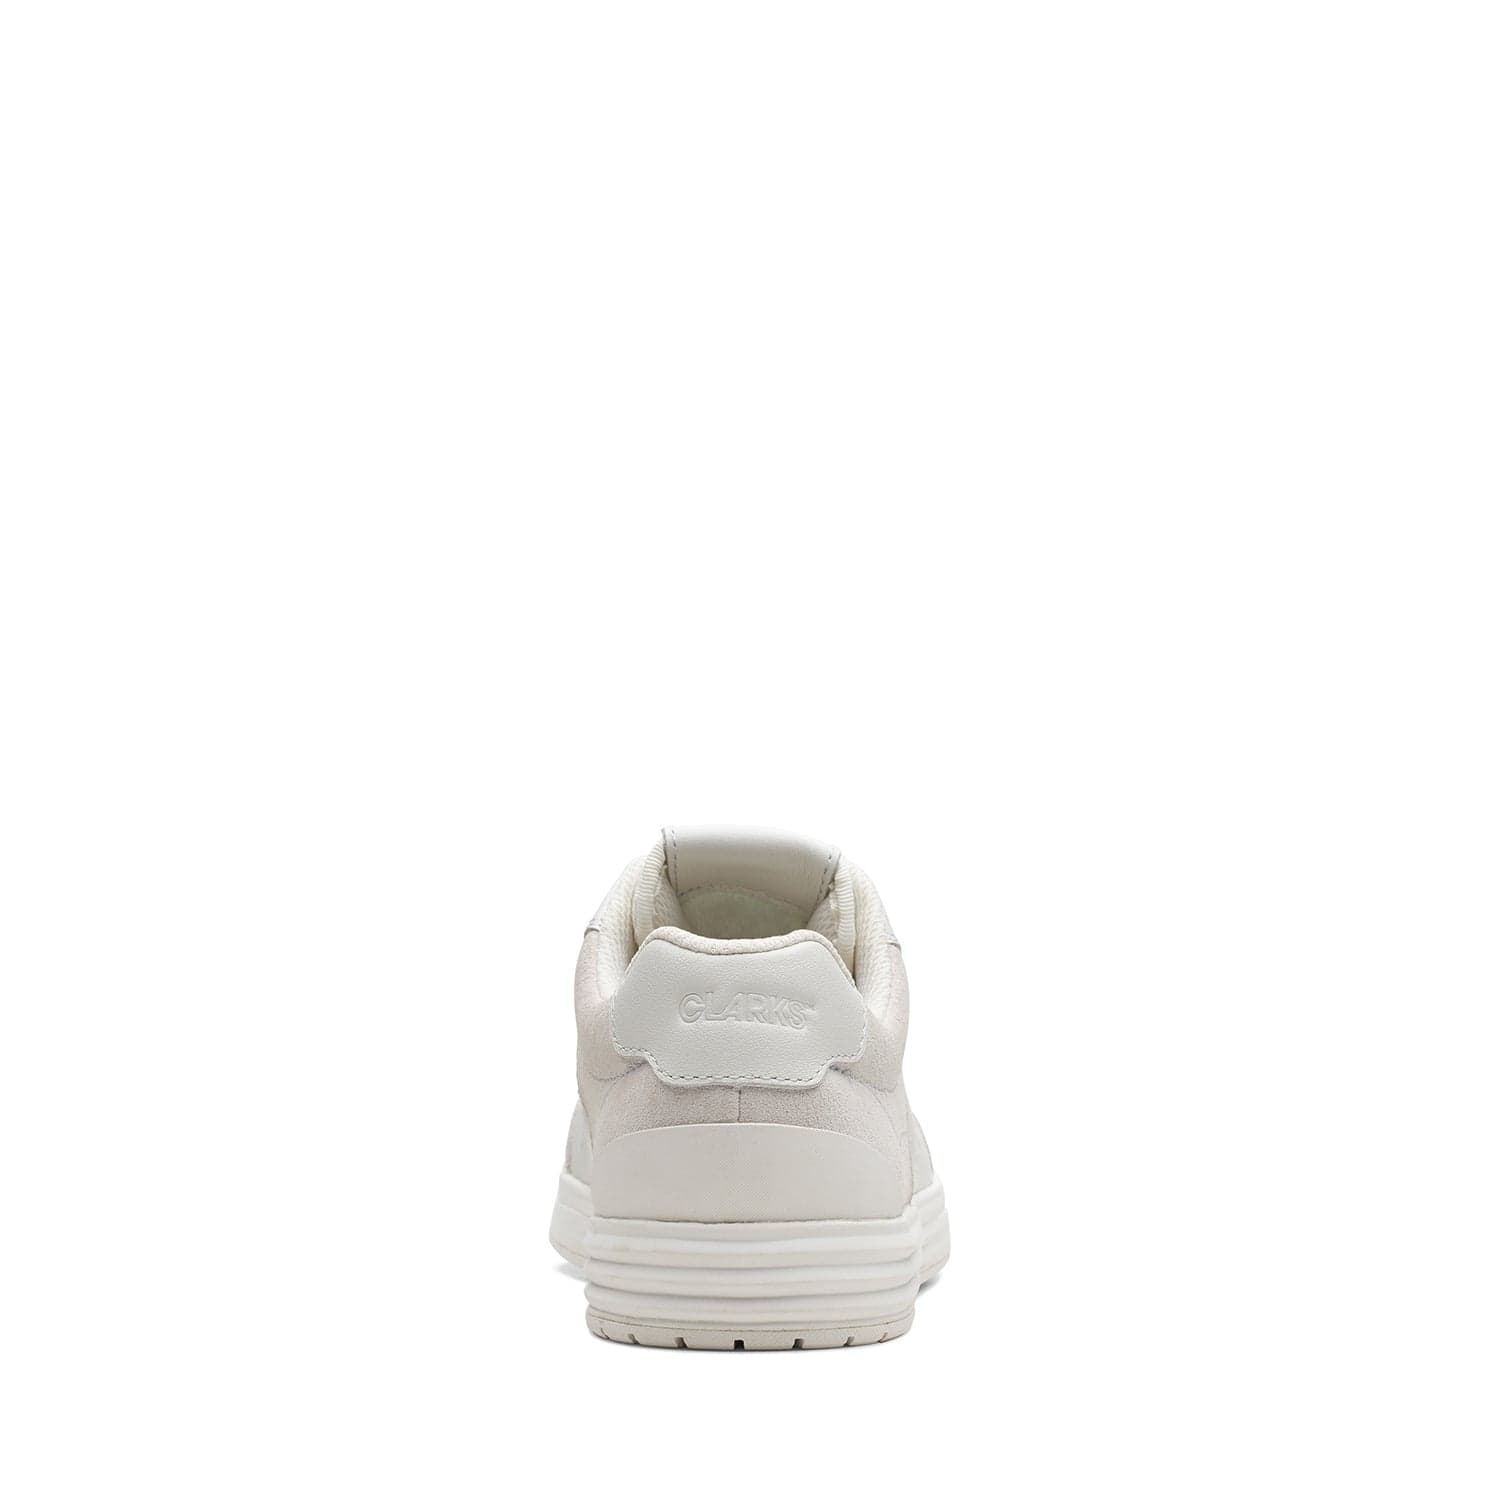 Clarks Cica 2.0 O - Shoes - White Combi - 261726347 - G Width (Standard Fit)